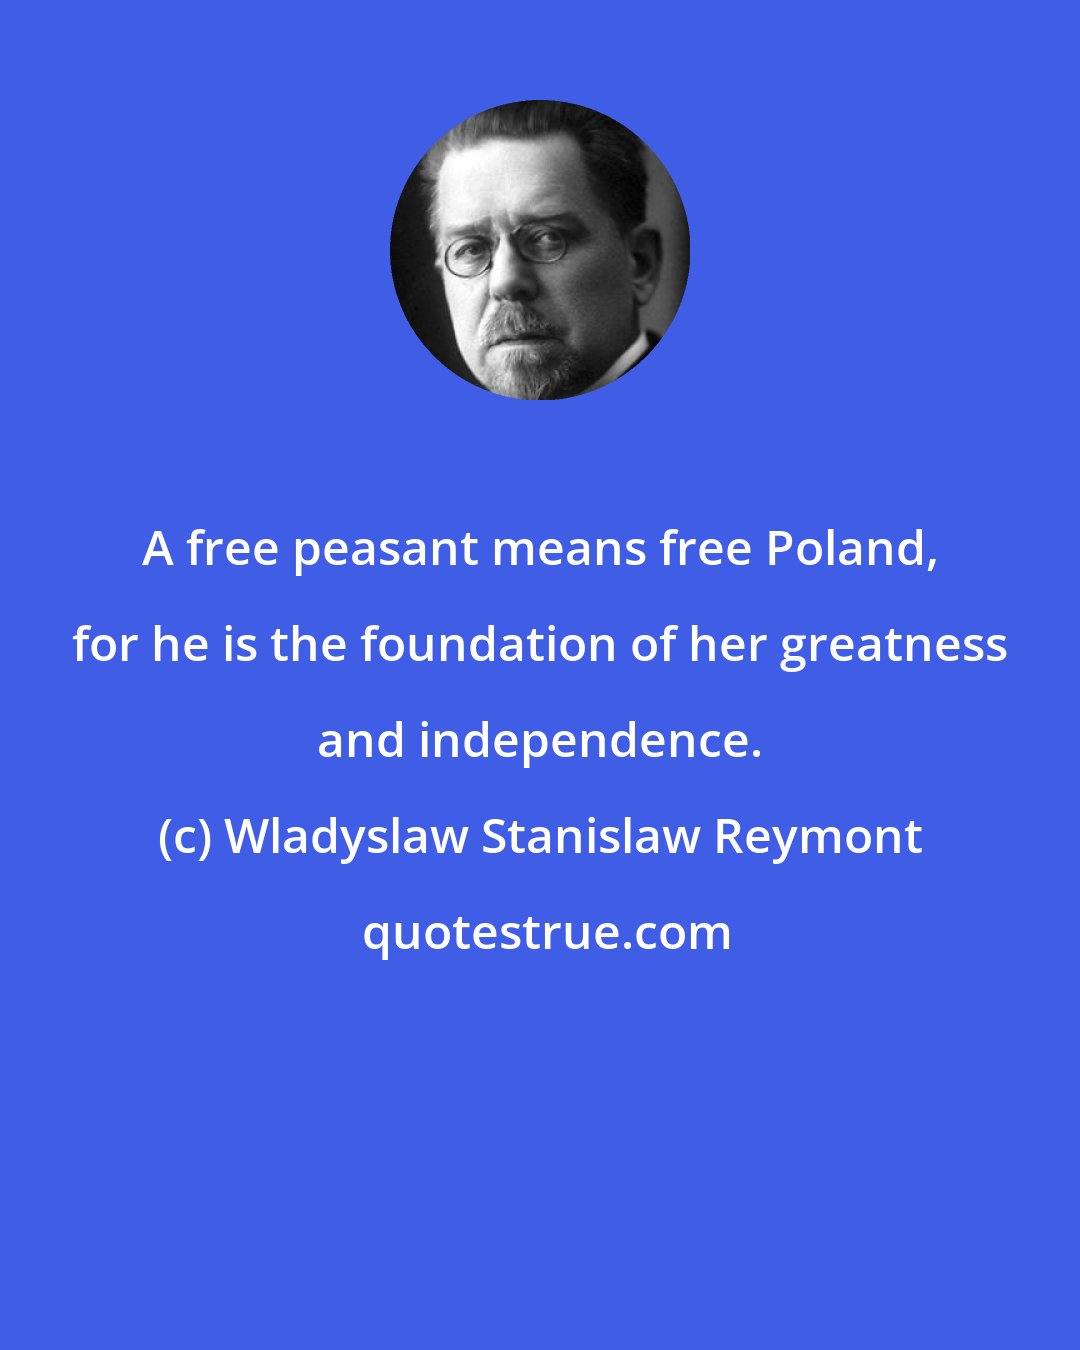 Wladyslaw Stanislaw Reymont: A free peasant means free Poland, for he is the foundation of her greatness and independence.